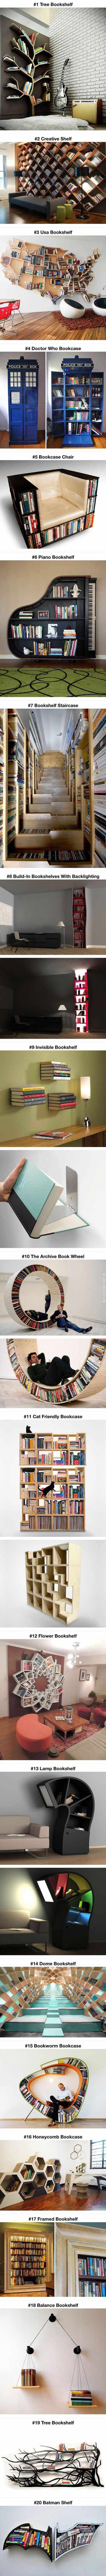 Probably+The+Most+Creative+Bookshelves+Ever